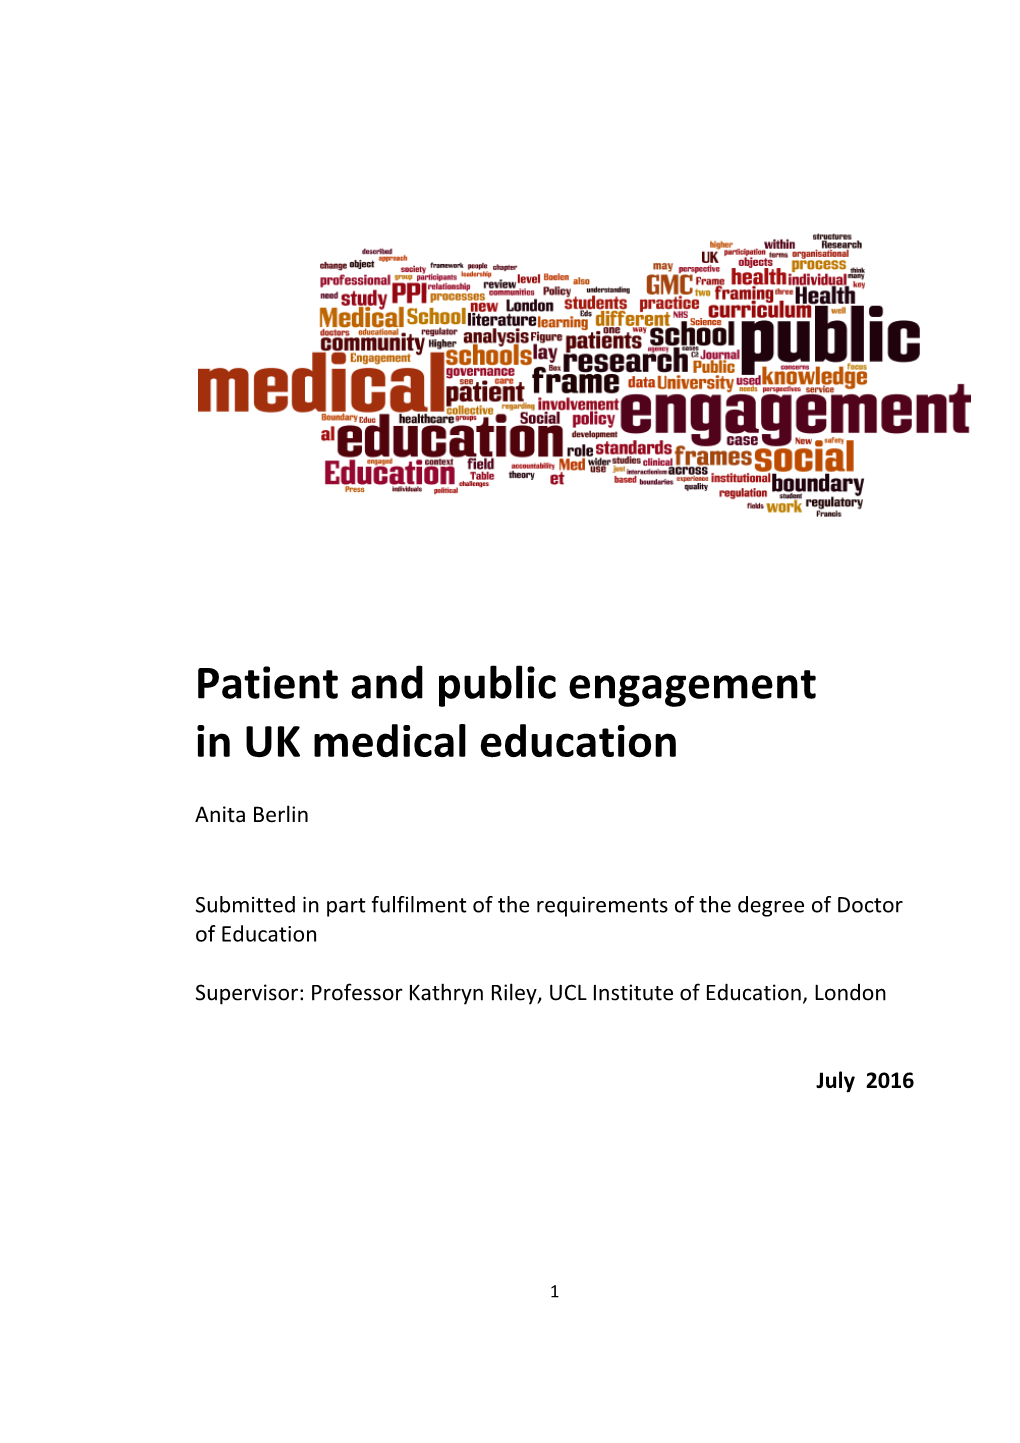 Patient and Public Engagement in UK Medical Education